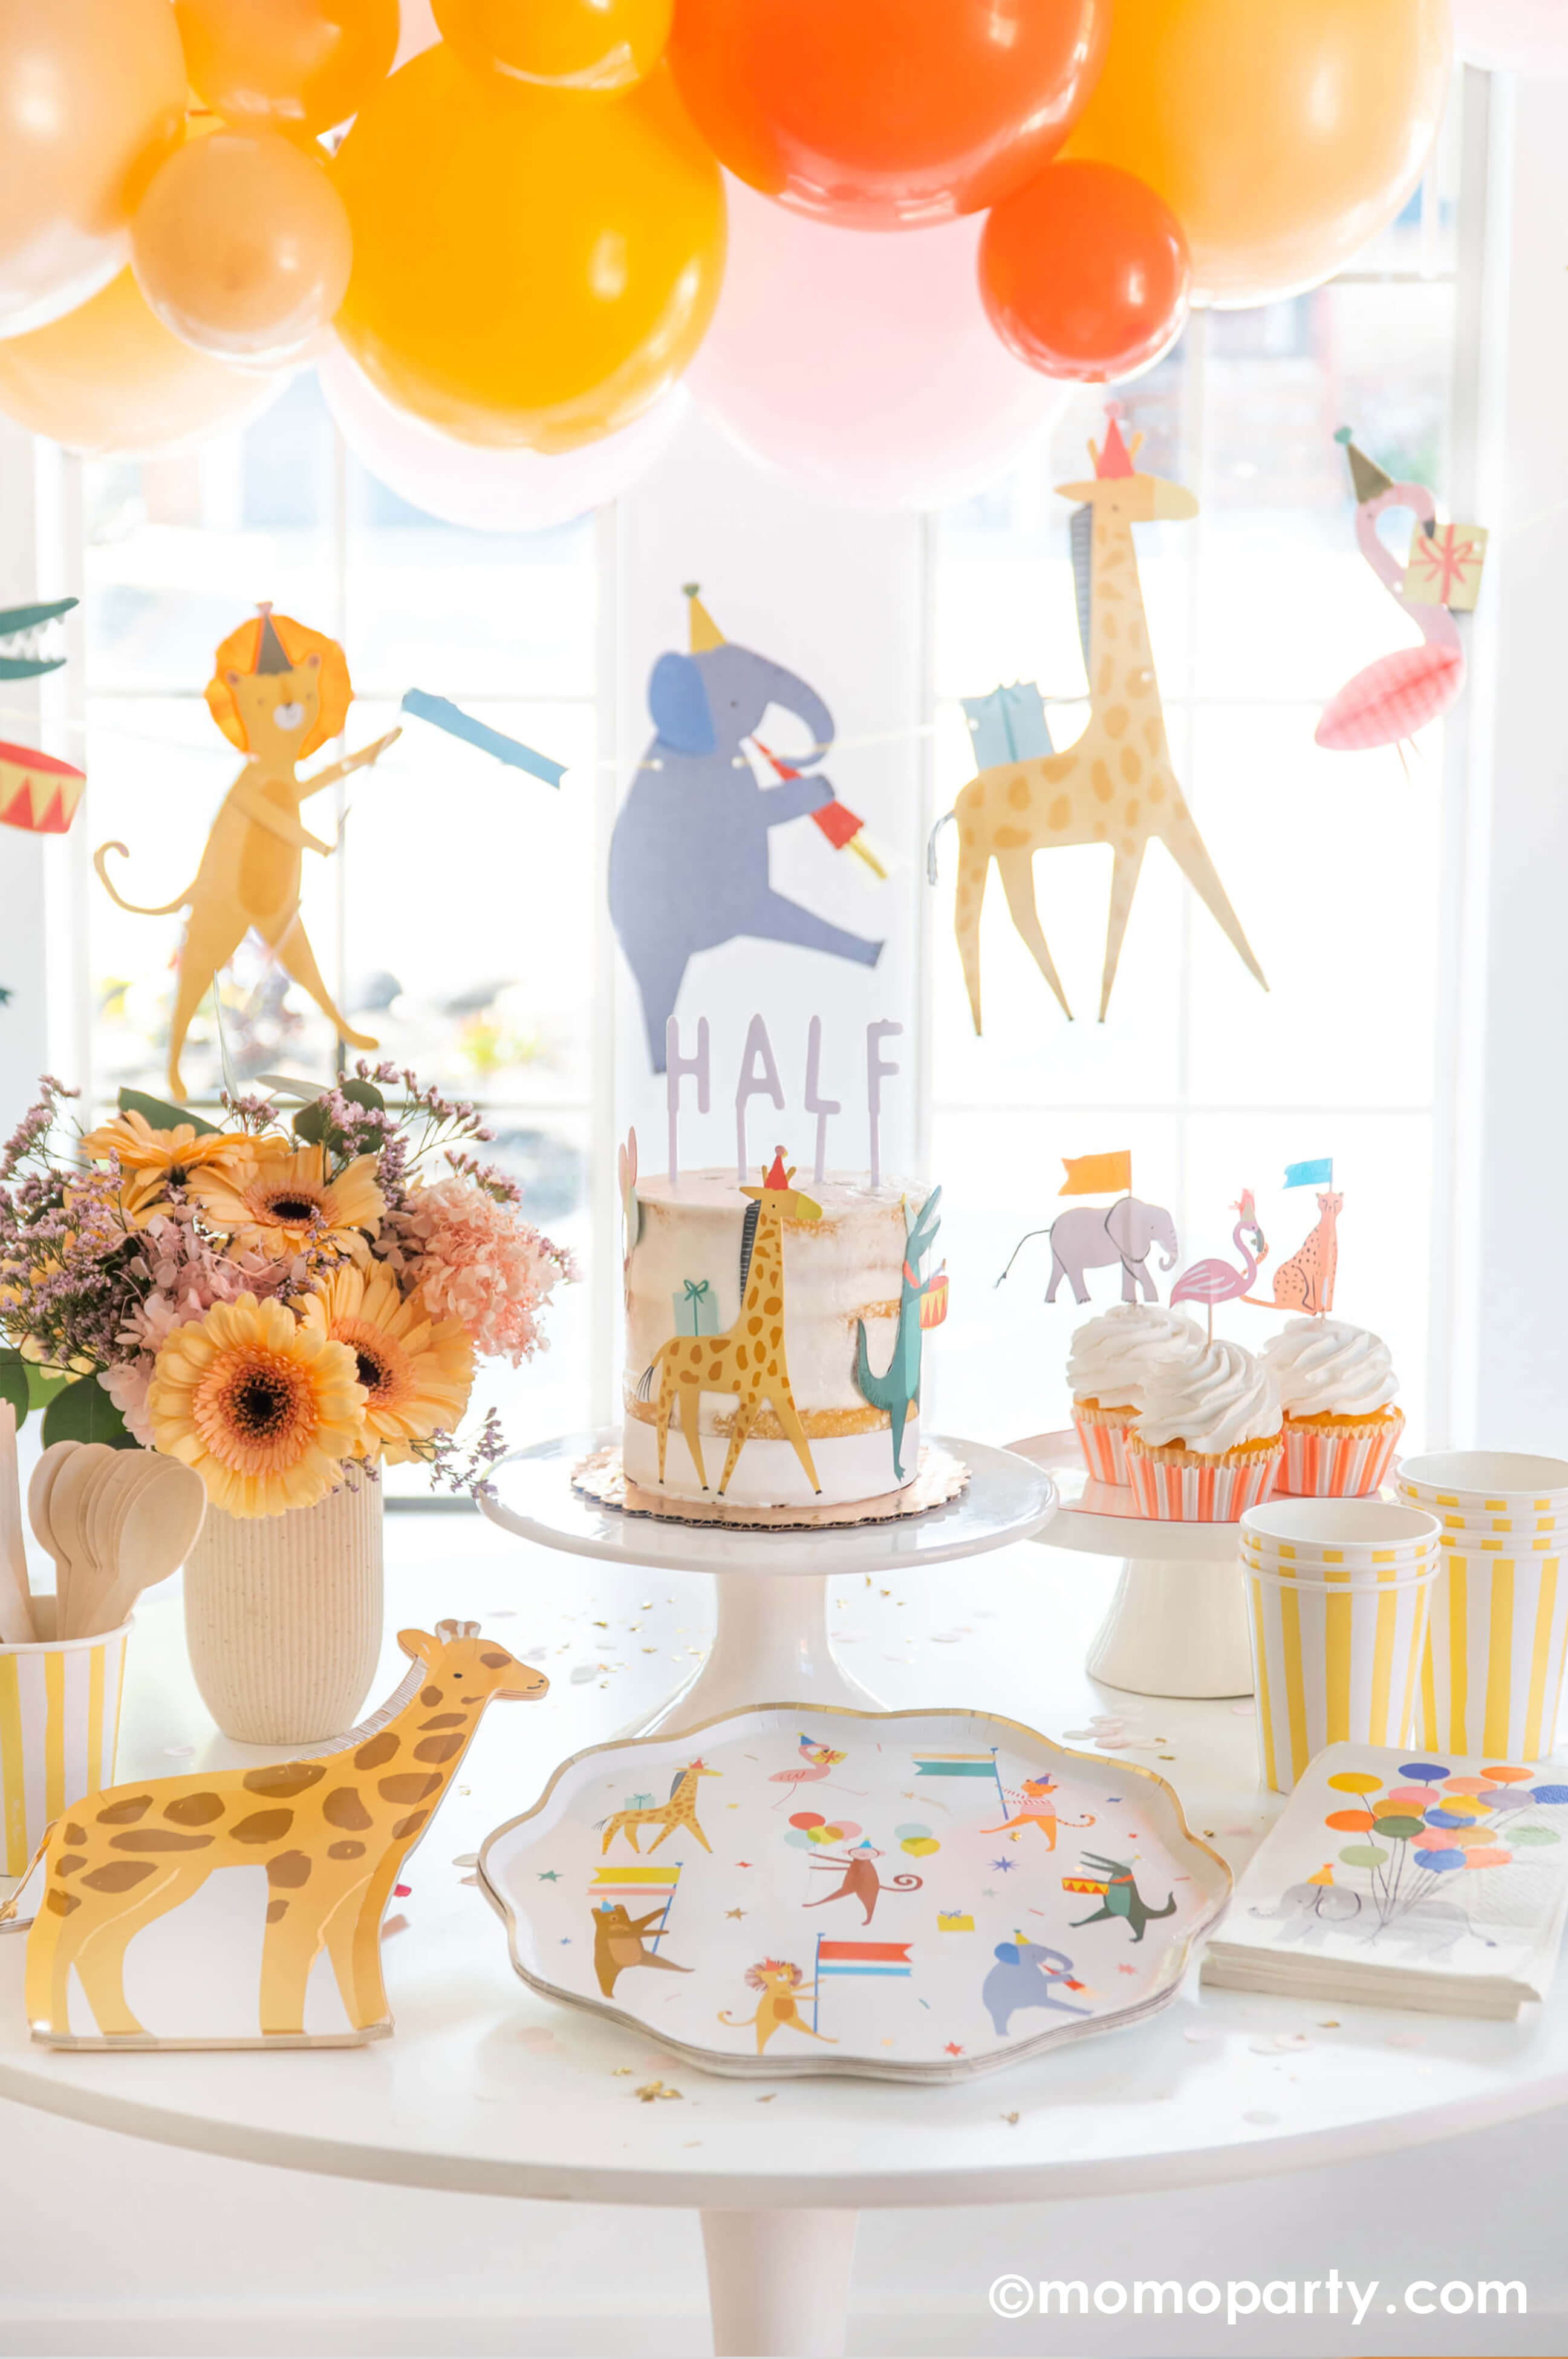 A kid's animal themed party table featuring Momo Party's Animal Parade Dinner plate, giraffe shaped plates, light yellow striped cups and safari animal cake toppers by Meri Meri, along with a beautiful spring flower arrangement as the centerpiece and a fun animal parade birthday garland featuring a lion, an elephant, a giraffe, a flamingo, and a festive balloon garland in a warm color tone in the back, it makes a great party inspiration for kid's animal, safari, carnival themed birthday party.